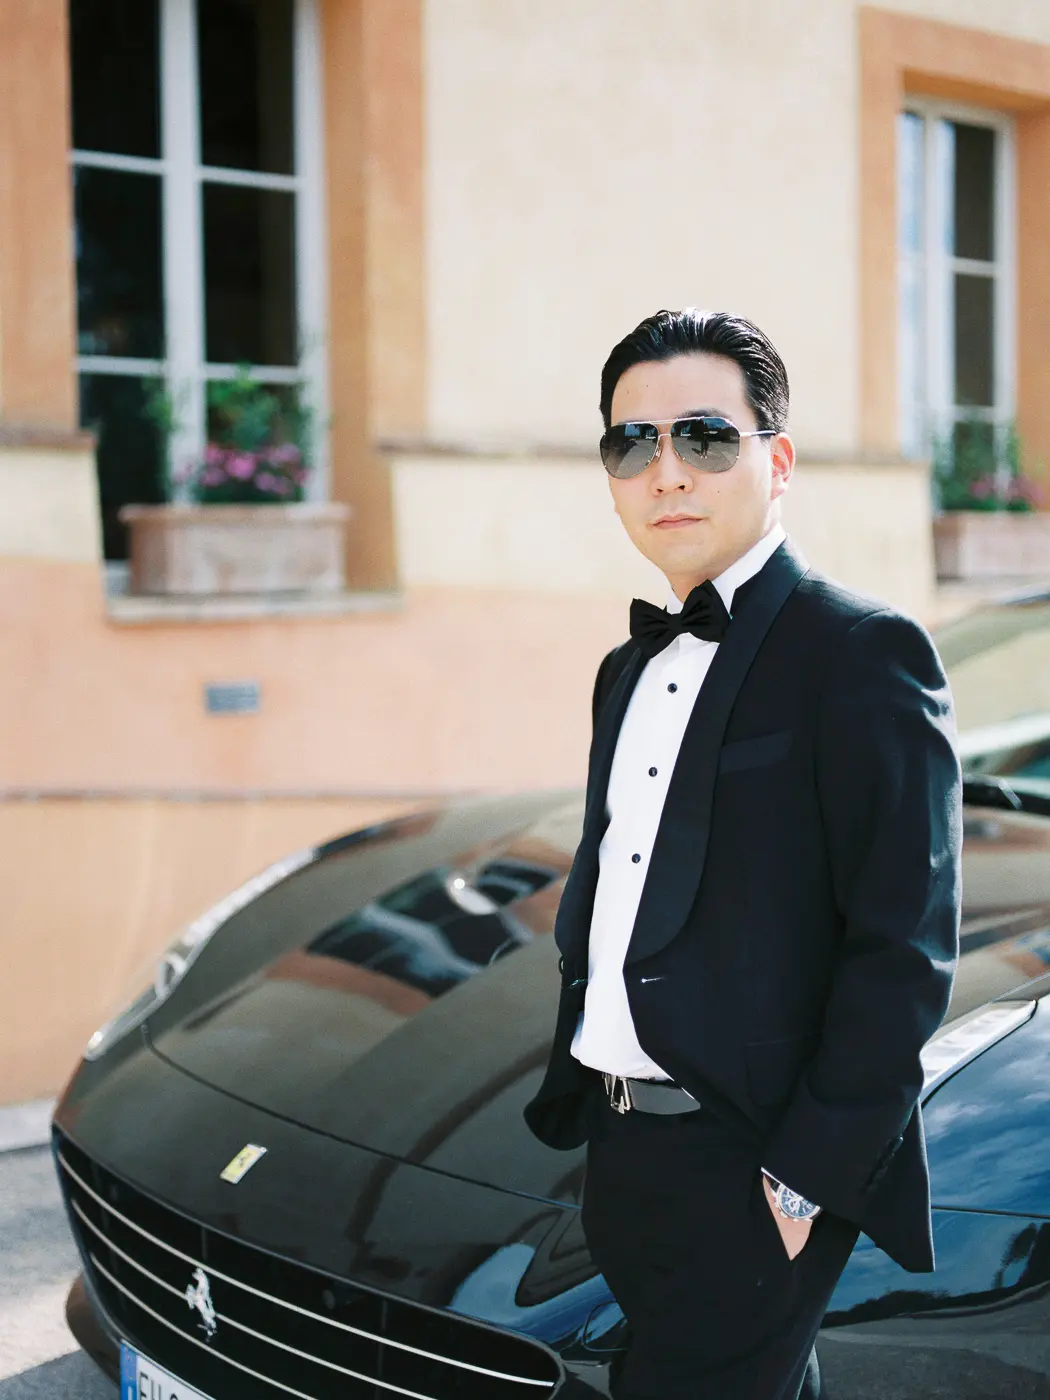 Stylish portrait of the groom with ferrari car in front of the historic stone walls of a medieval villa